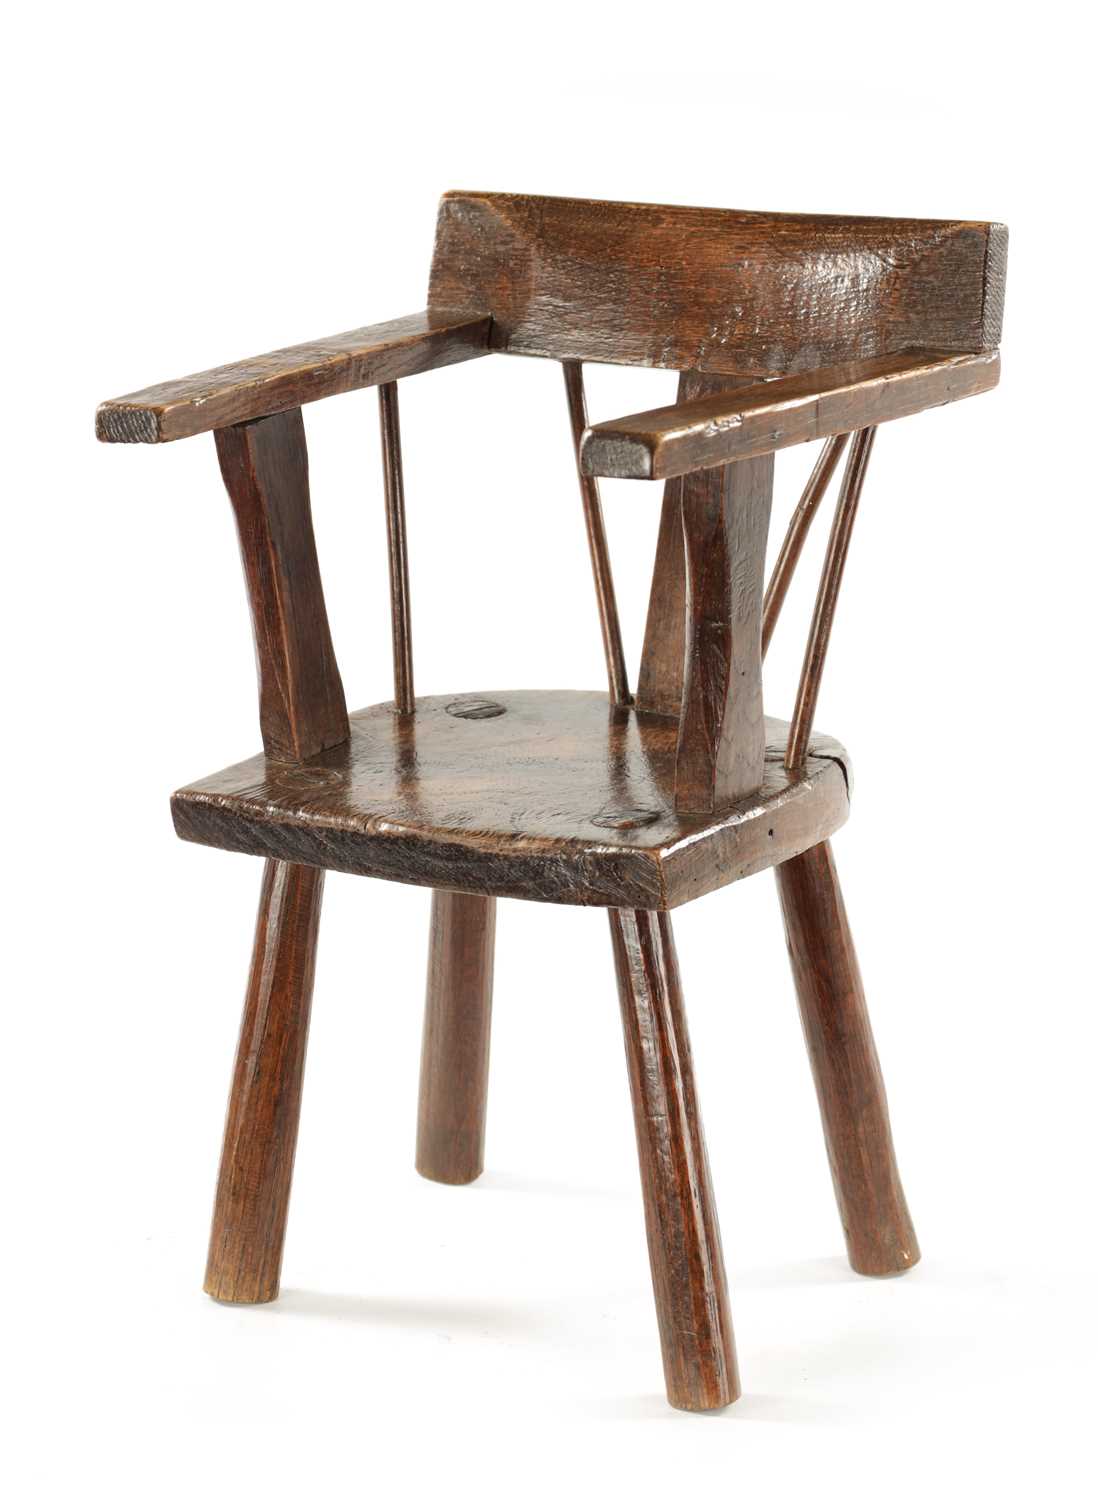 A RARE 18TH CENTURY PRIMITIVE ASH AND ELM CHILD’S CHAIR